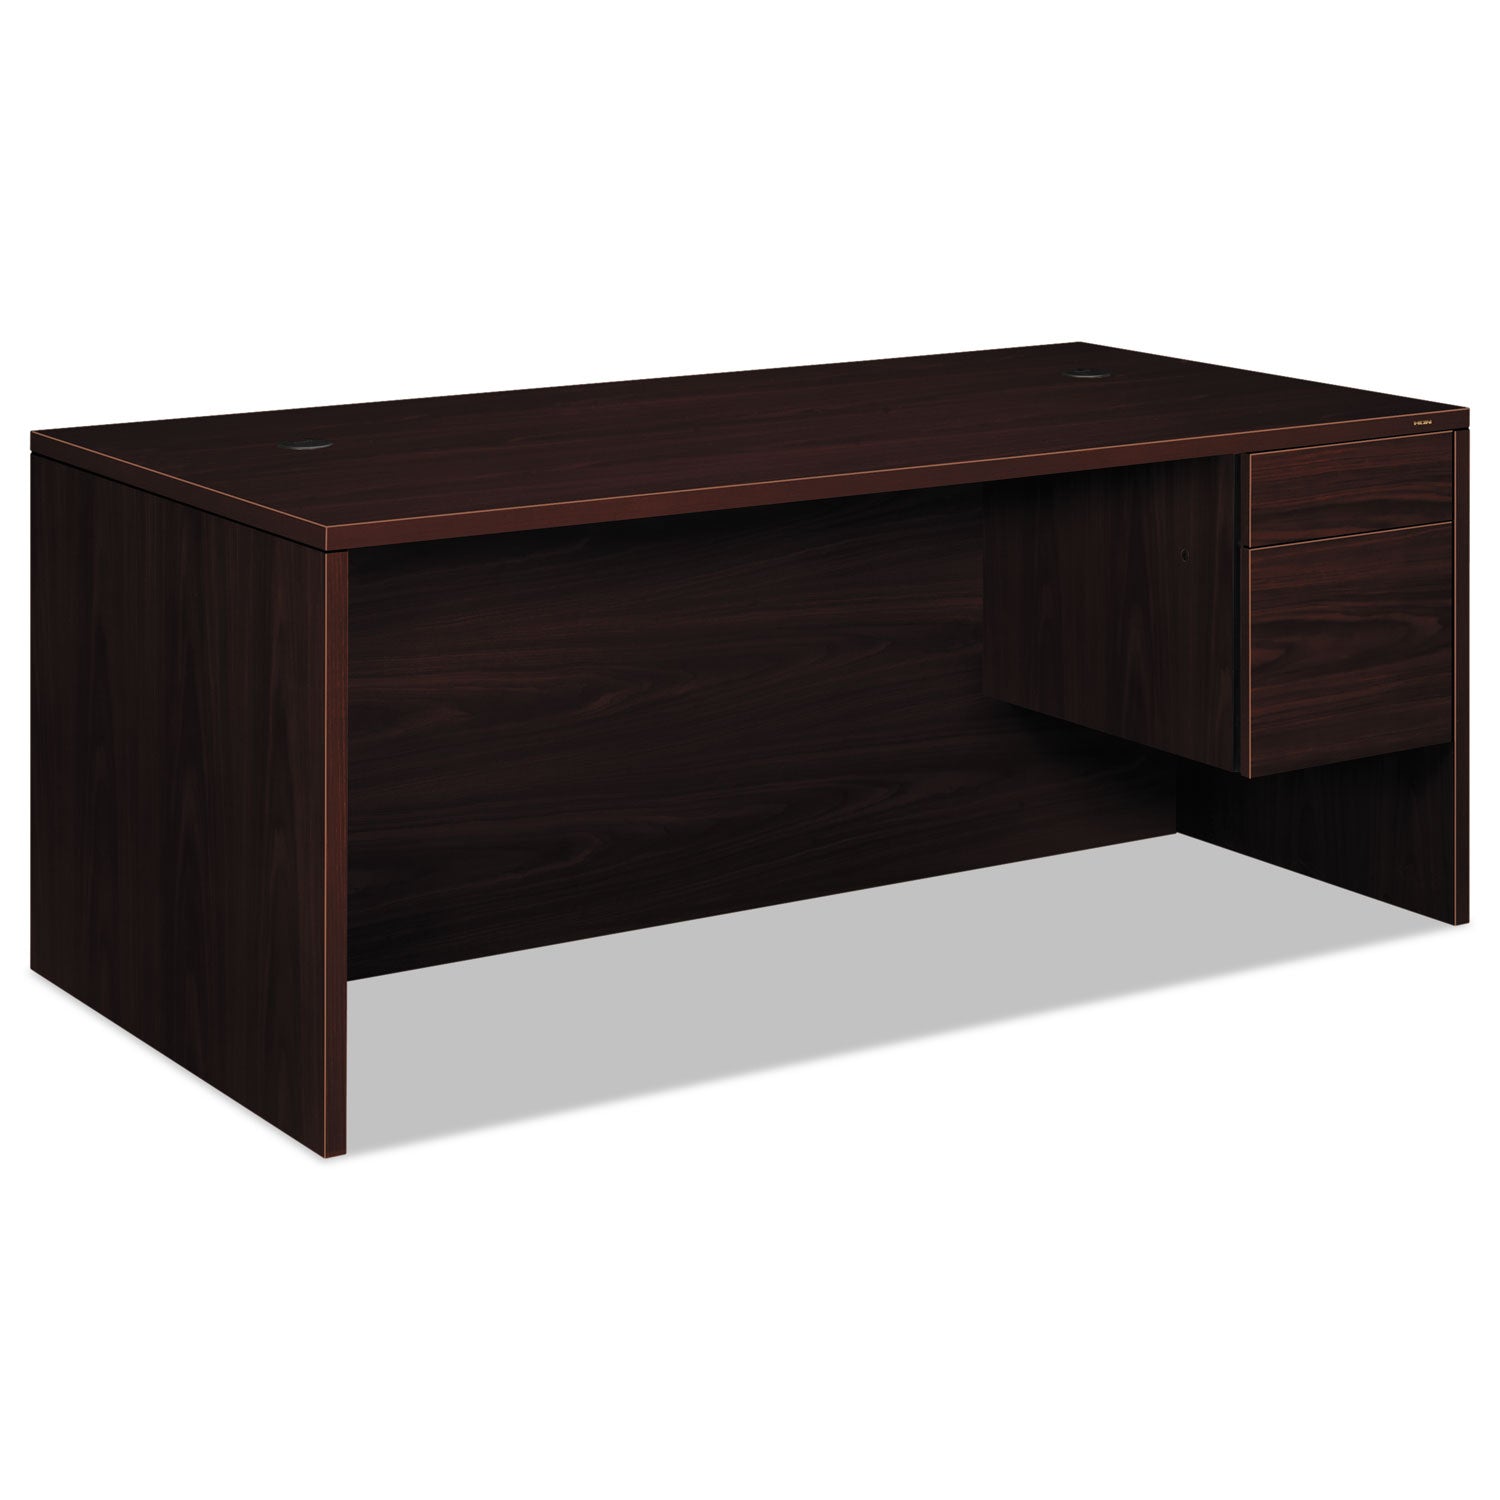 10500 Series "L" Workstation Right Pedestal Desk with 3/4 Height Pedestal, 72" x 36" x 29.5", Mahogany - 